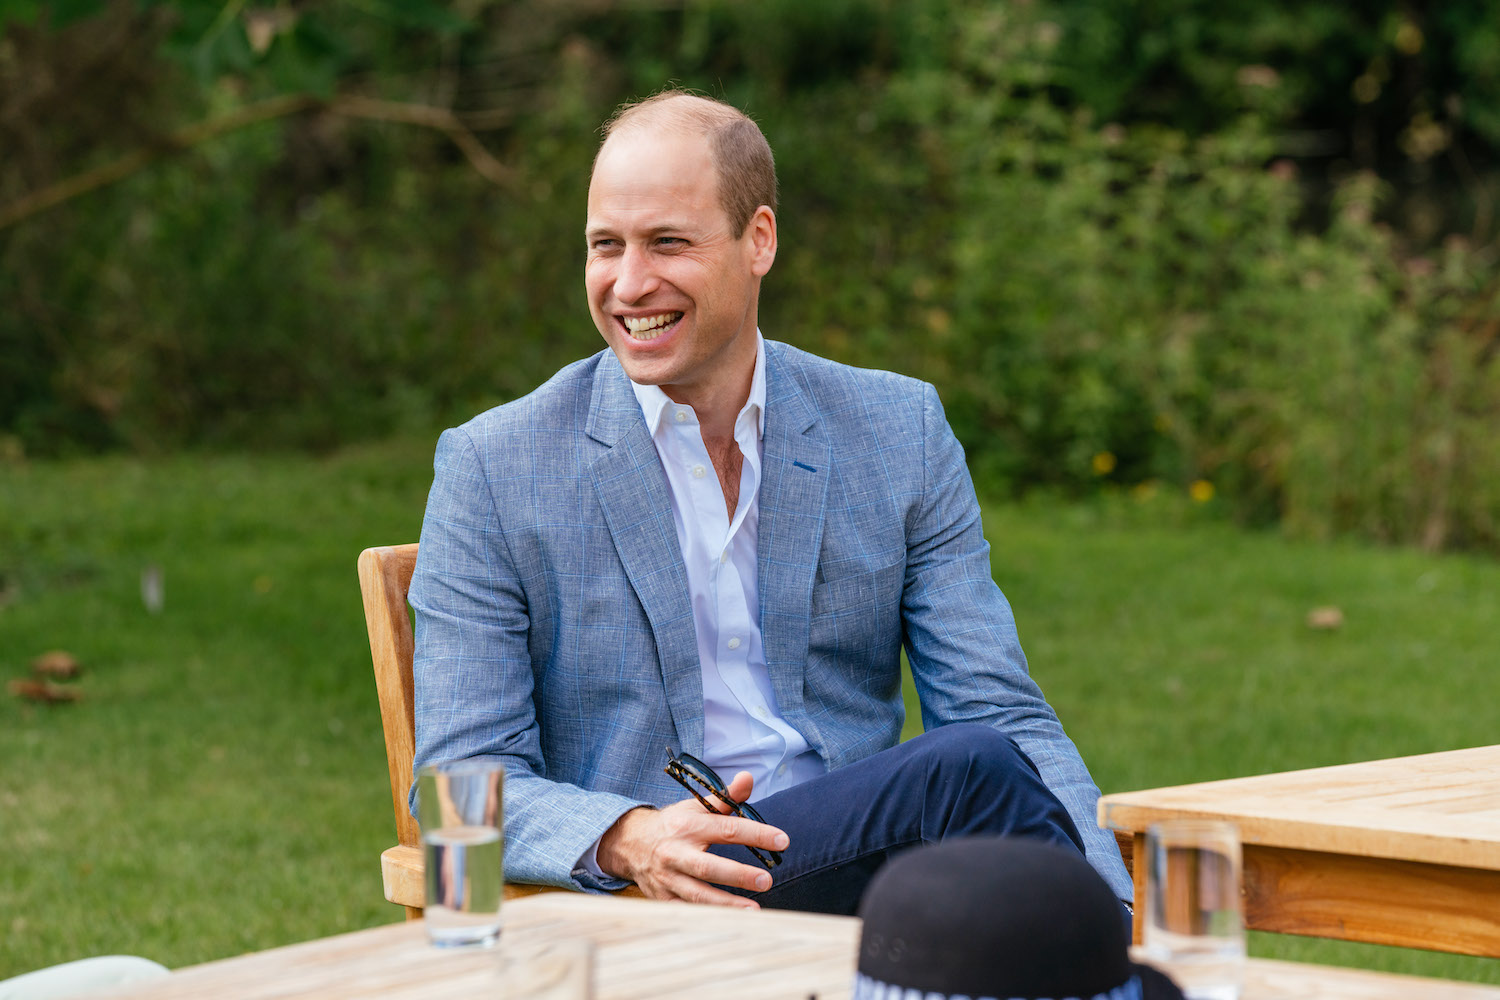 Prince William speaks to four representatives from organisations which will benefit from the Royal Foundation's £1.8 Million fund to support frontline workers and the nation's mental health at the Sandringham Estate